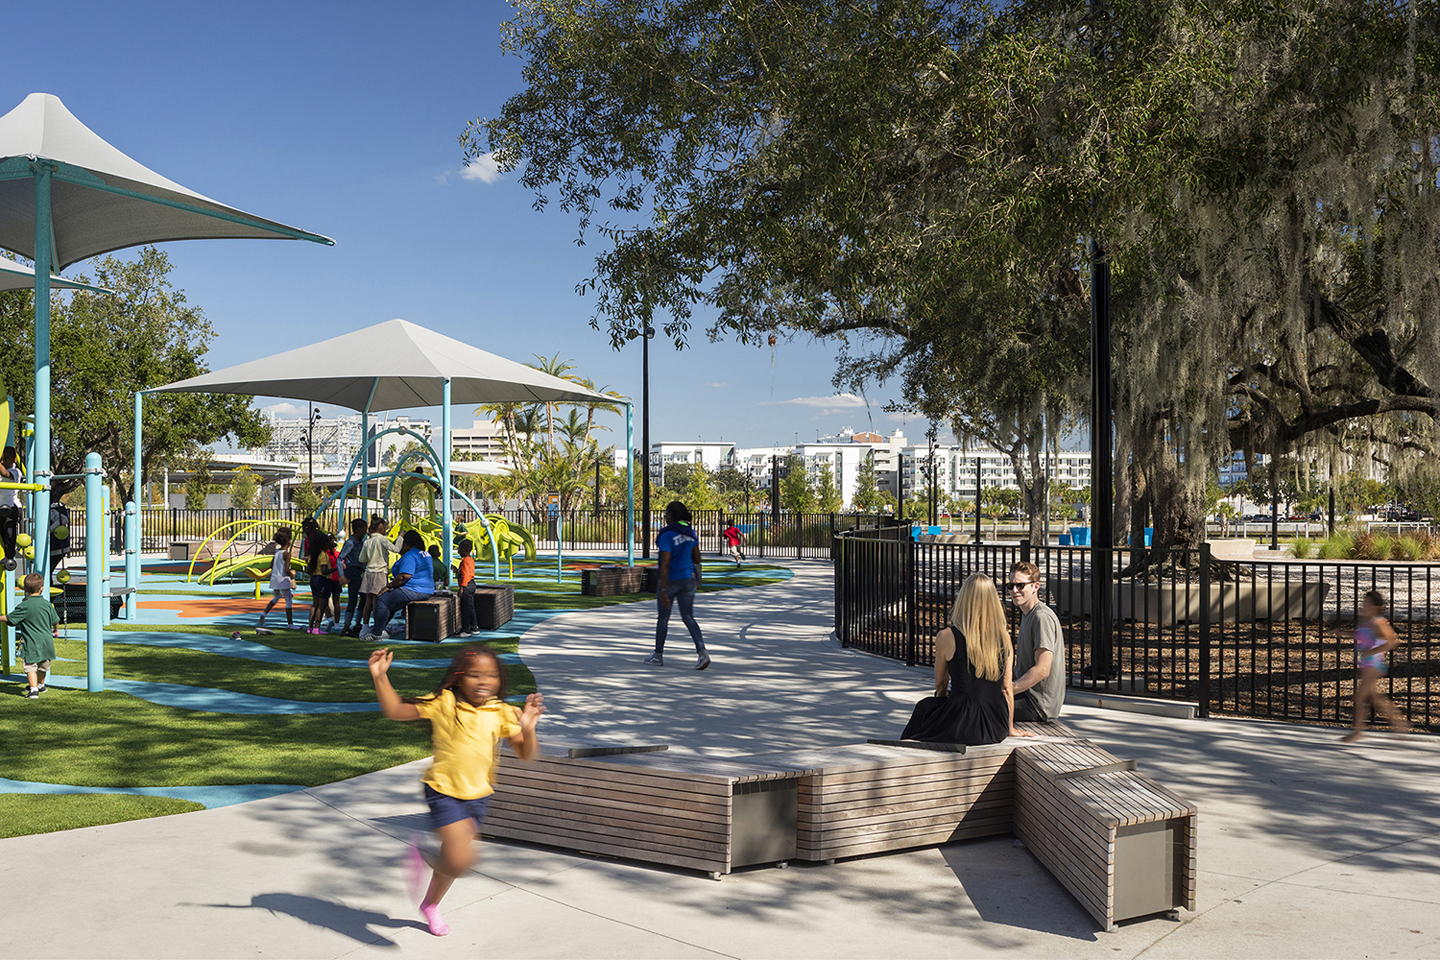 The West Tampa community enjoys the Civitas-designed Julian B. Lane Riverfront Park’s family-friendly features, including playground, splash pad, chess tables, bocce ball courts and more.